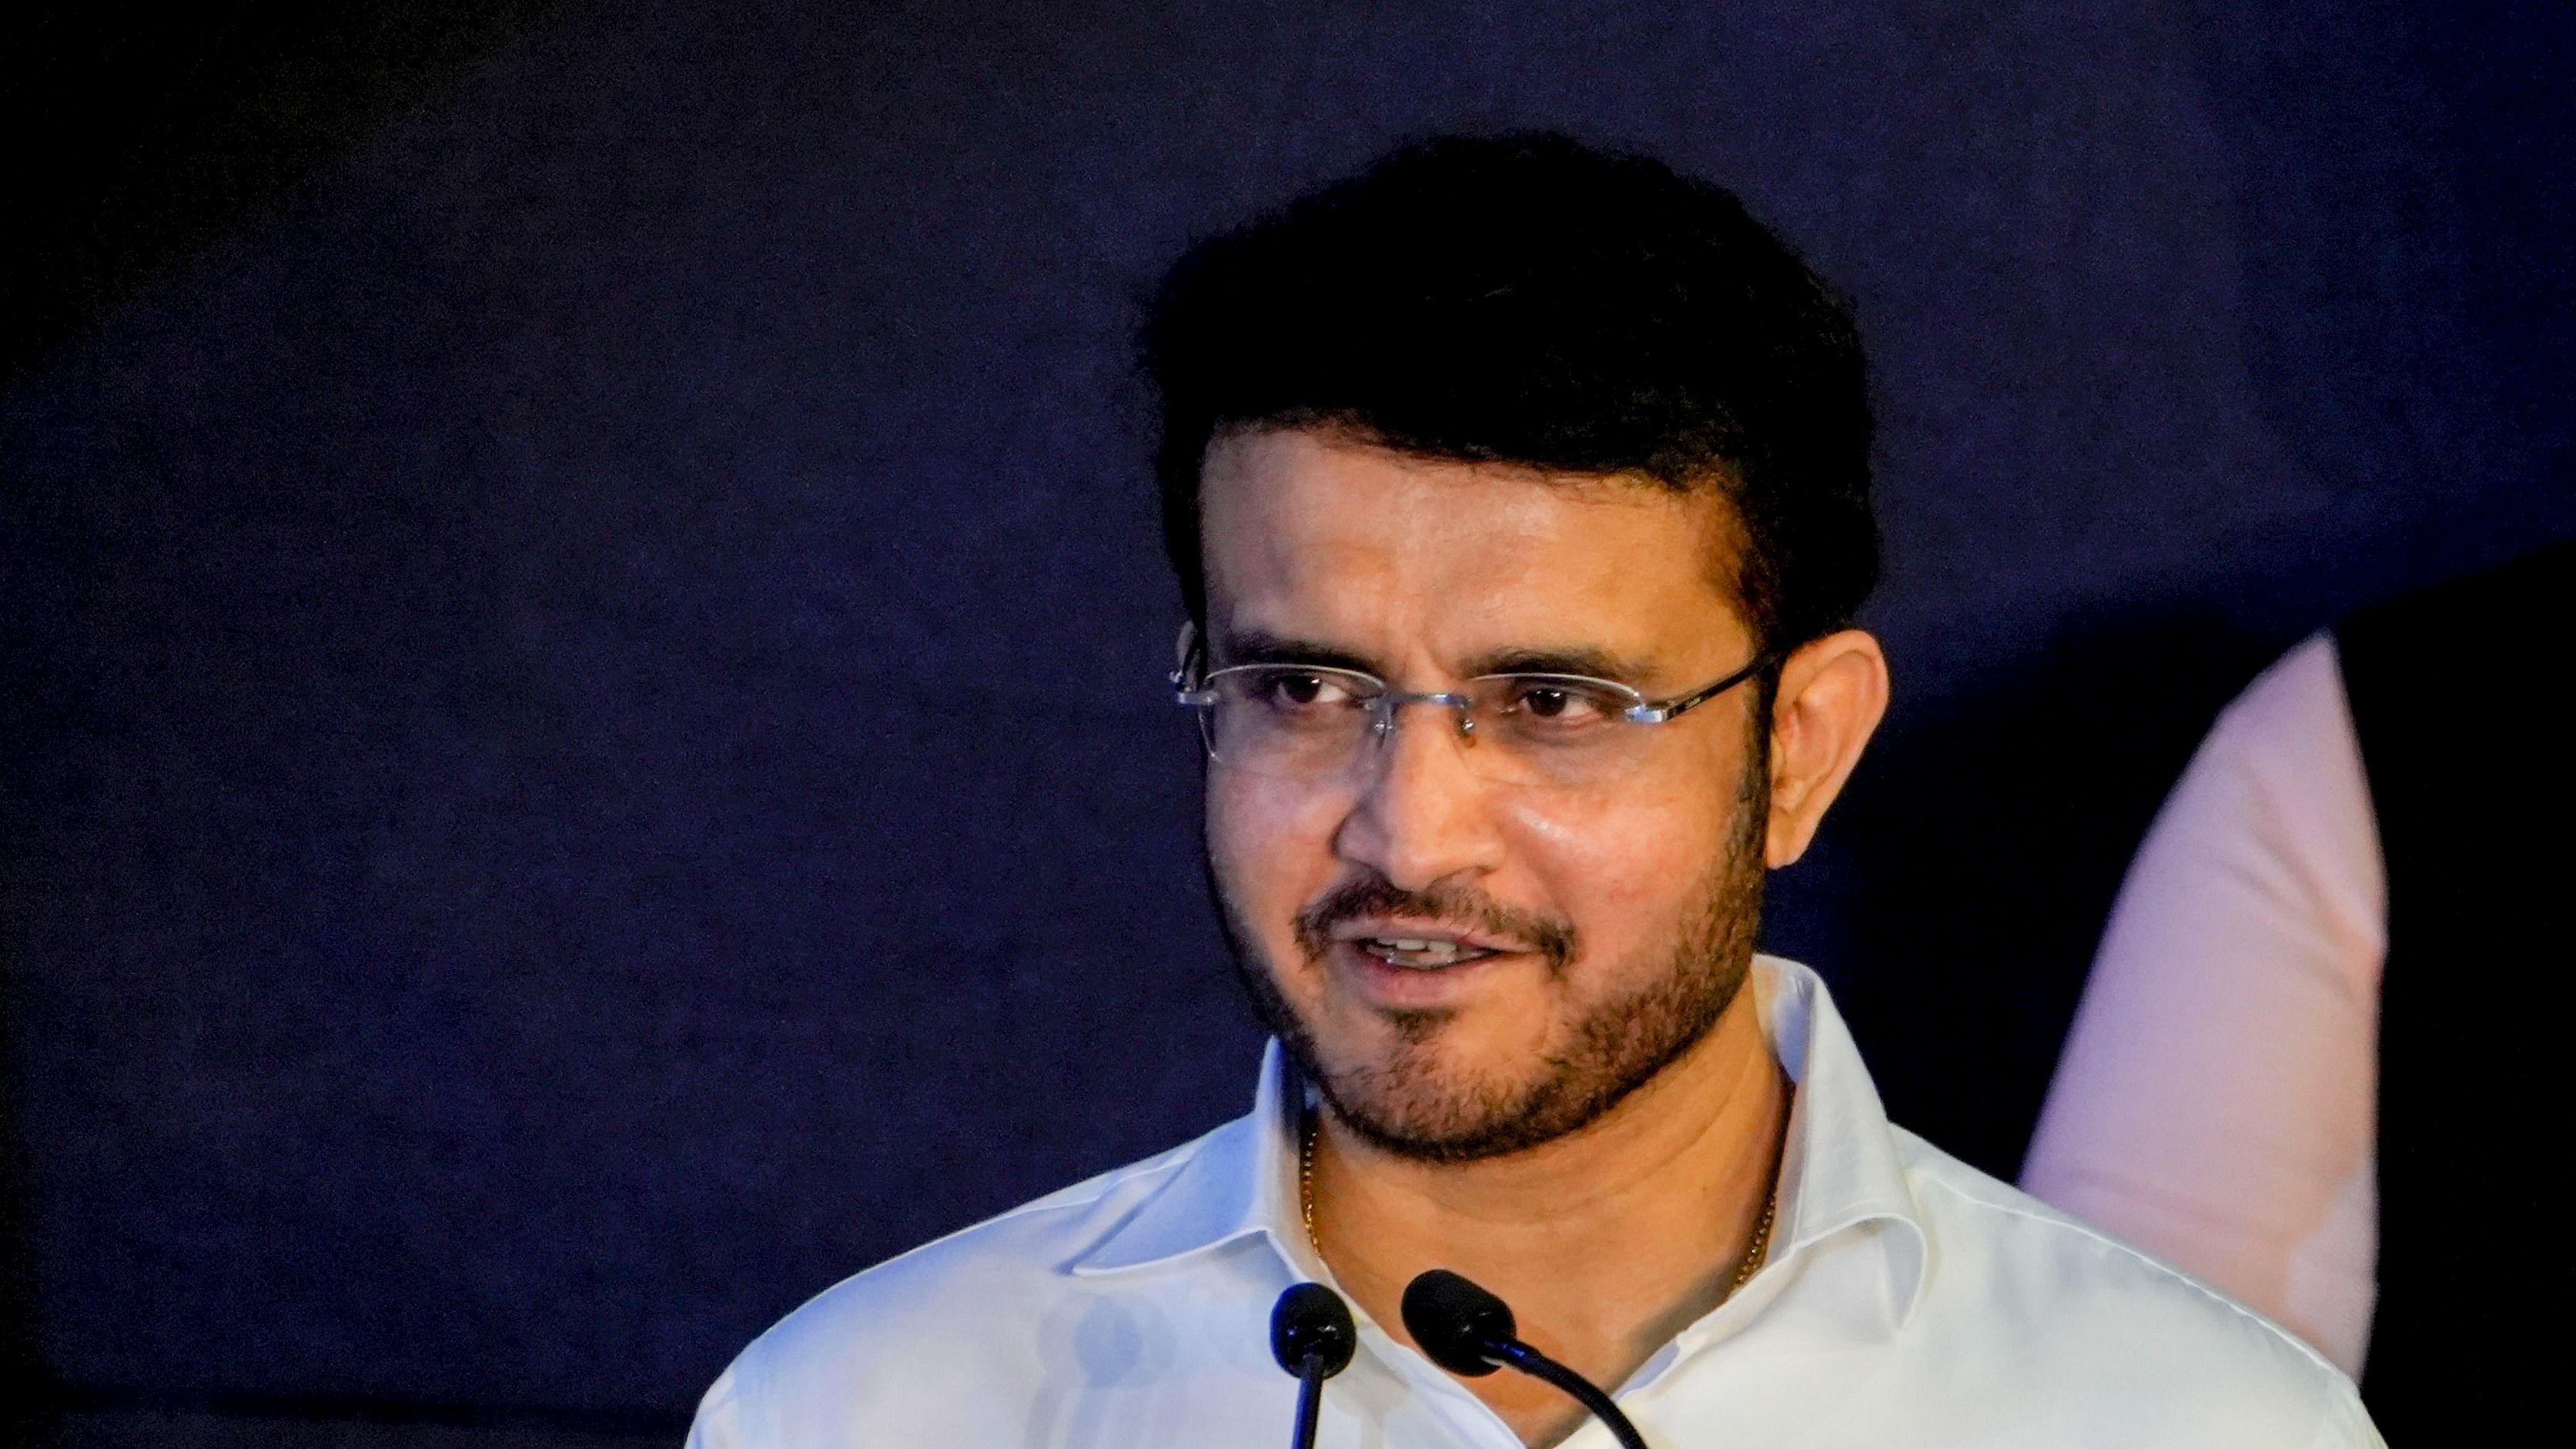 Ganguly said Women cricket in India will reach an "all-time high" in the next three years. Credit: PTI Photo